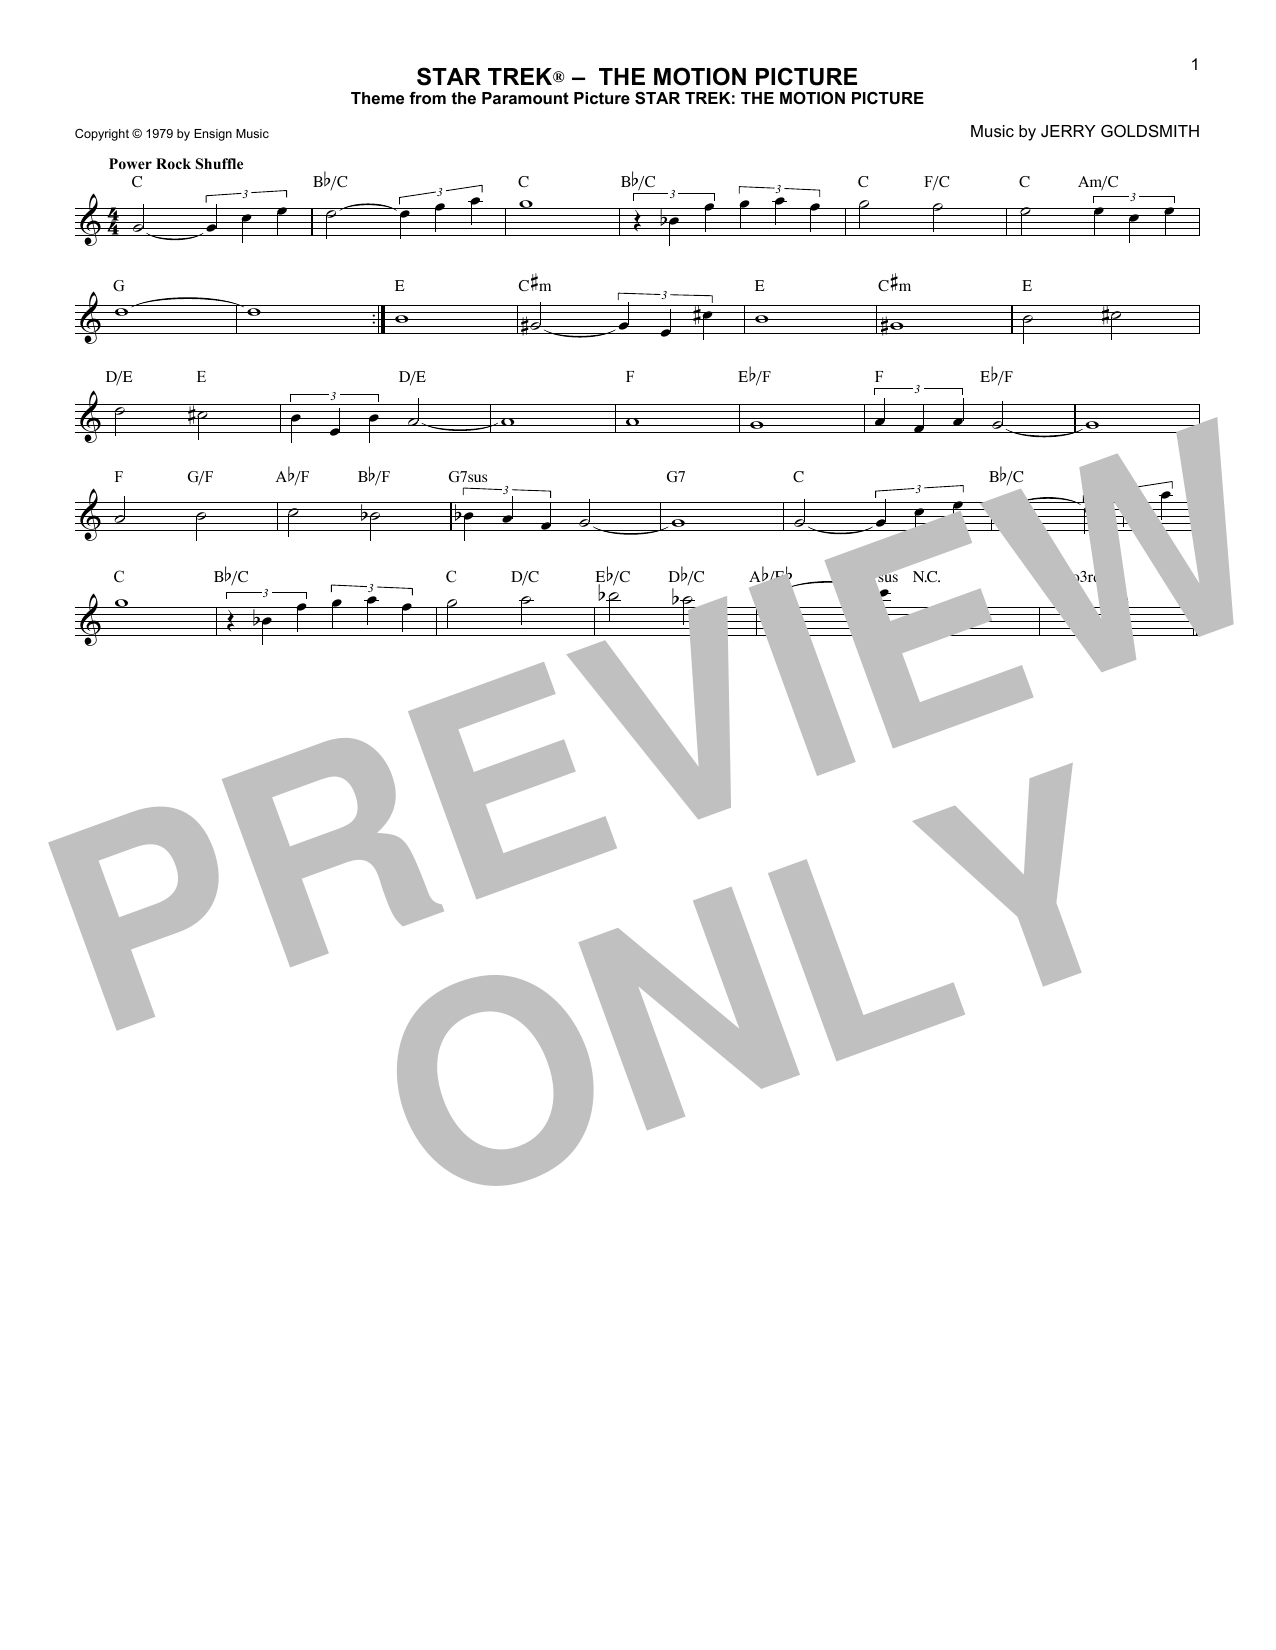 Jerry Goldsmith Star Trek(R) The Motion Picture sheet music preview music notes and score for Piano including 3 page(s)